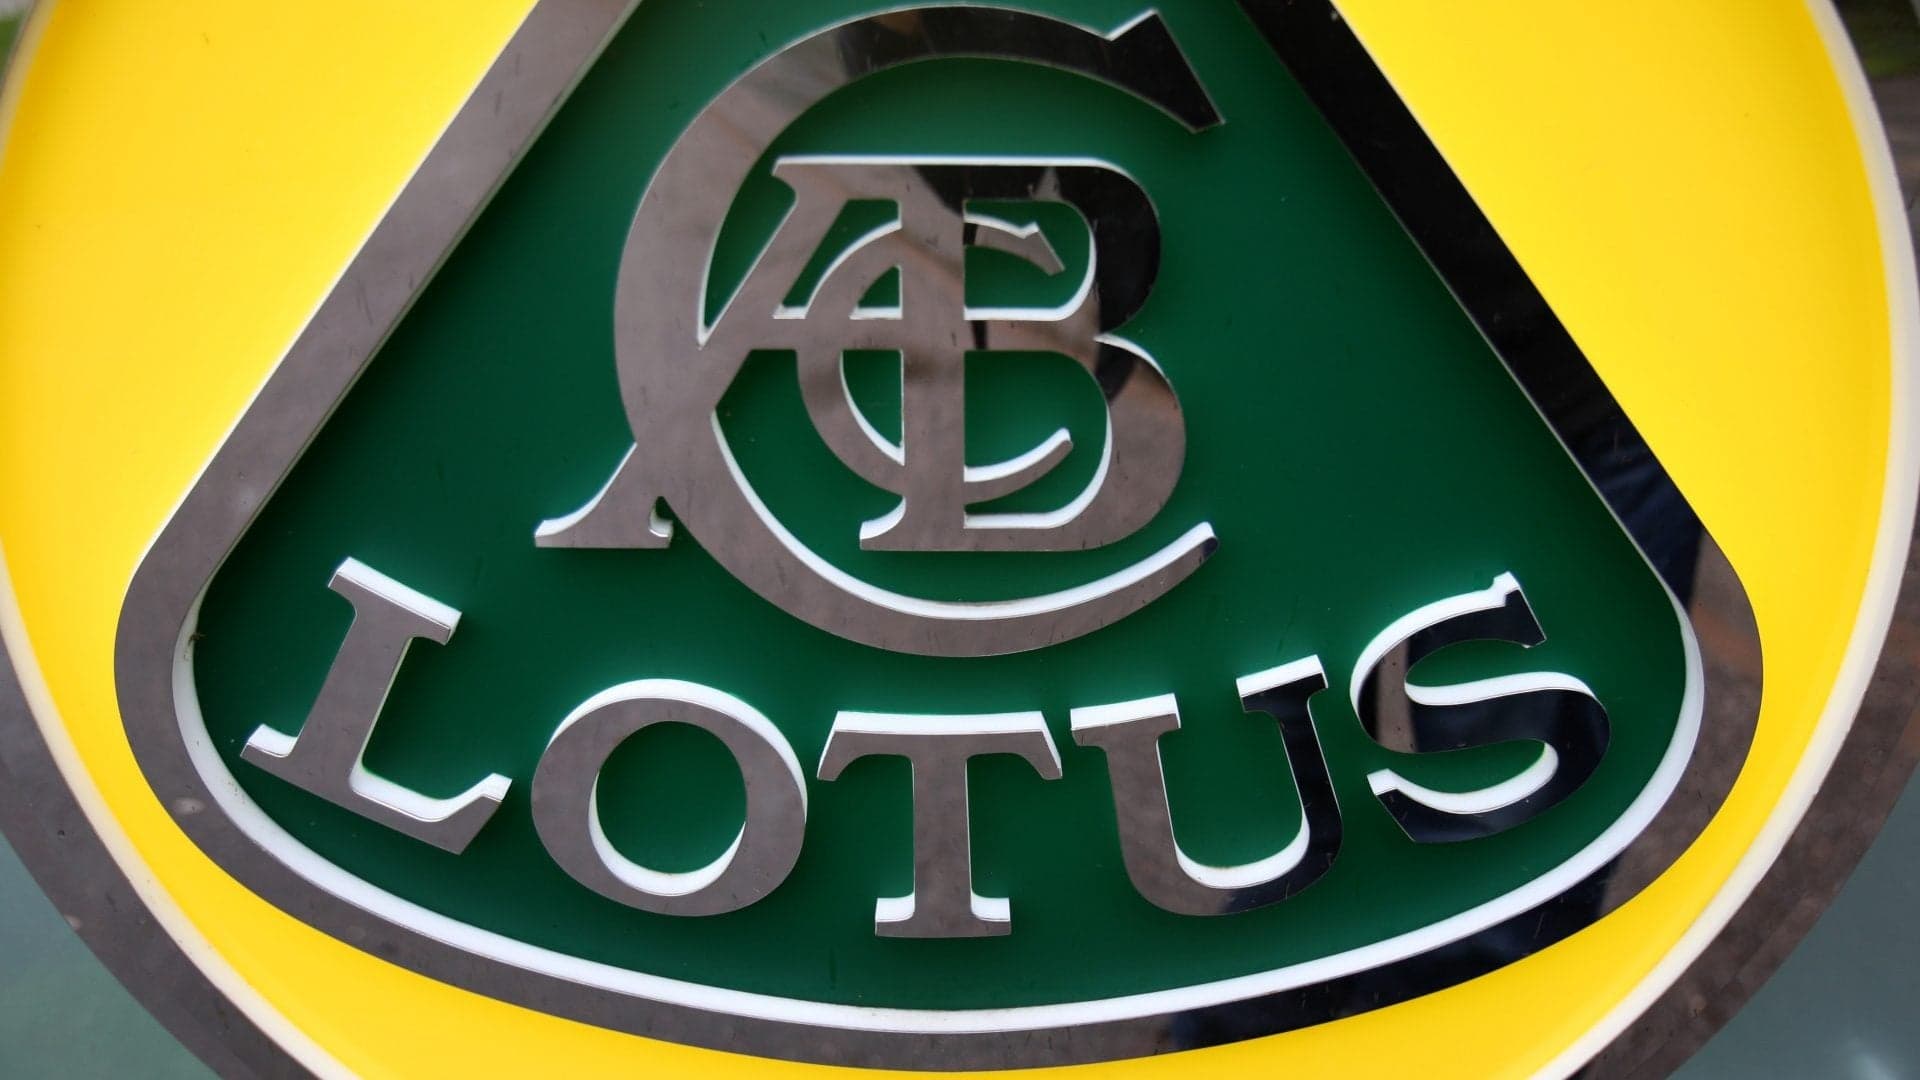 Lotus Partnering with Formula E Battery Supplier Williams to Develop Electric Hypercar